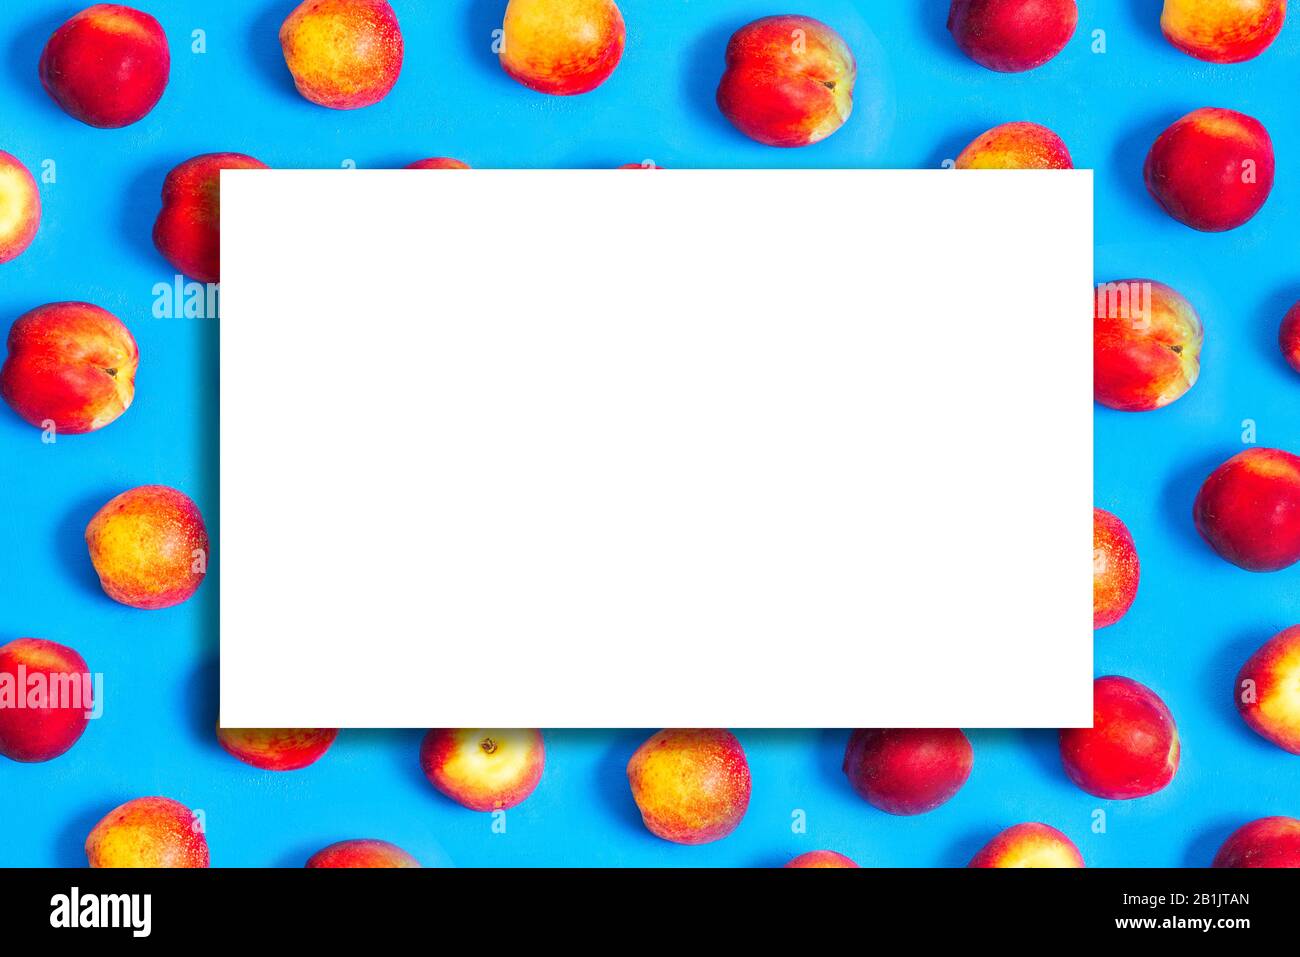 Peaches background with white frame for text. Flat lay of ripe peaches on a blue background. Summer fruits and healthy food Stock Photo